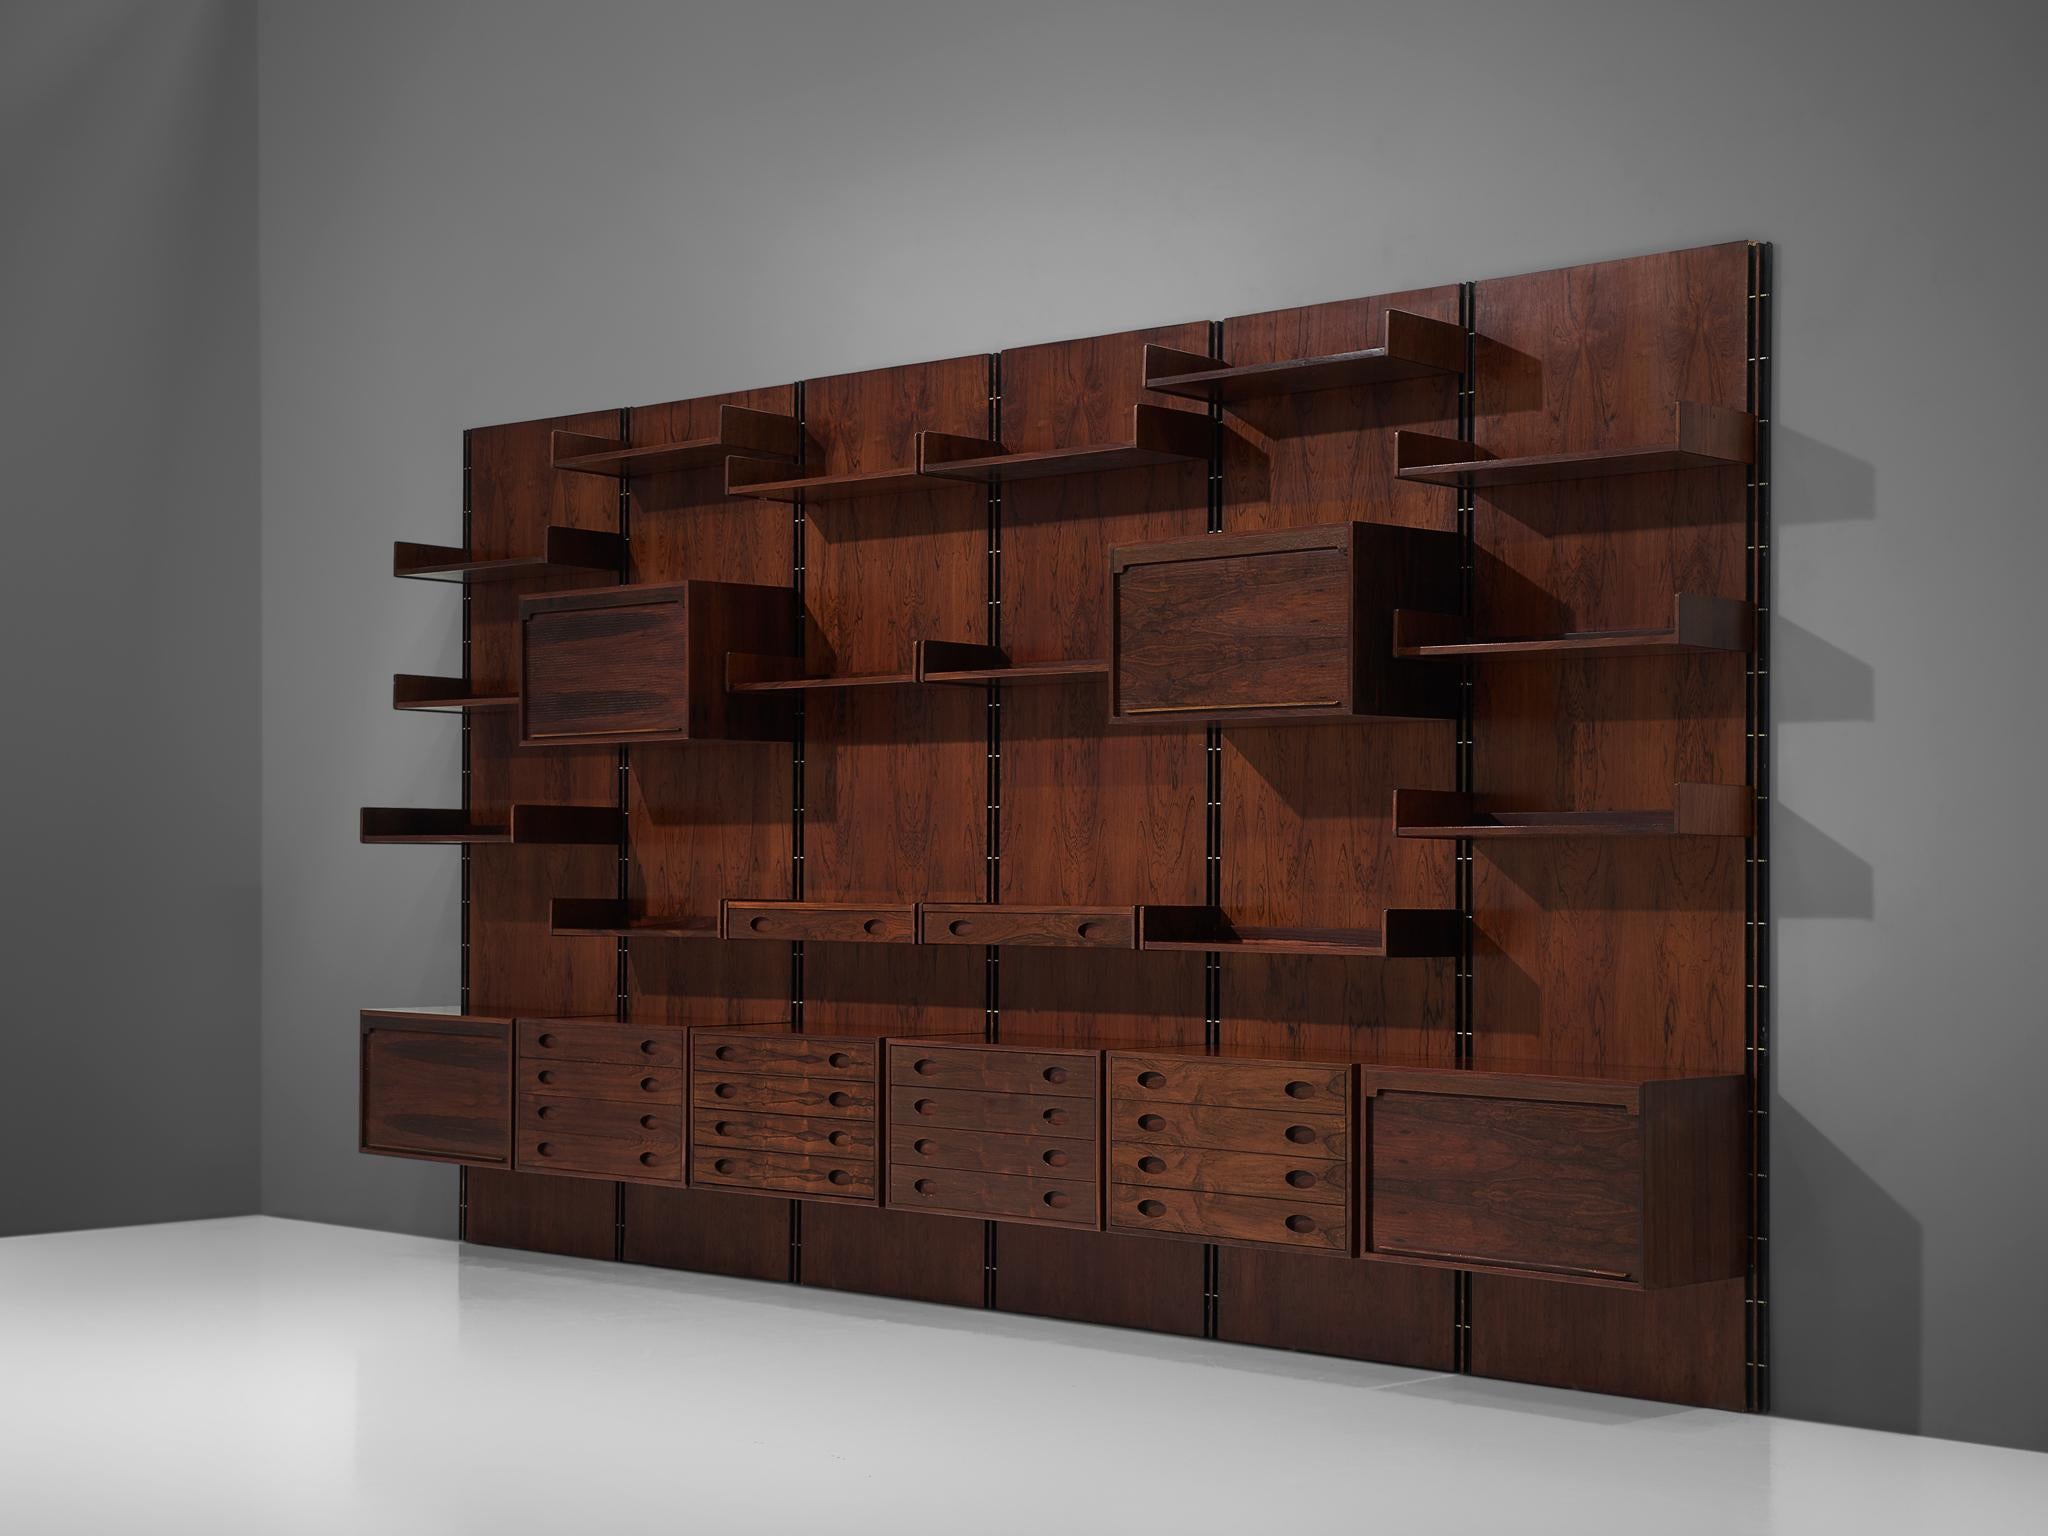 Gianfranco Frattini for Bernini, wall unit, rosewood, Italy, 1960s

This large 4.8mt/15.7ft wall unit is designed by the Italian designer Gianfranco Frattini. The cabinet consists of six panels with various different storage facilities. There are